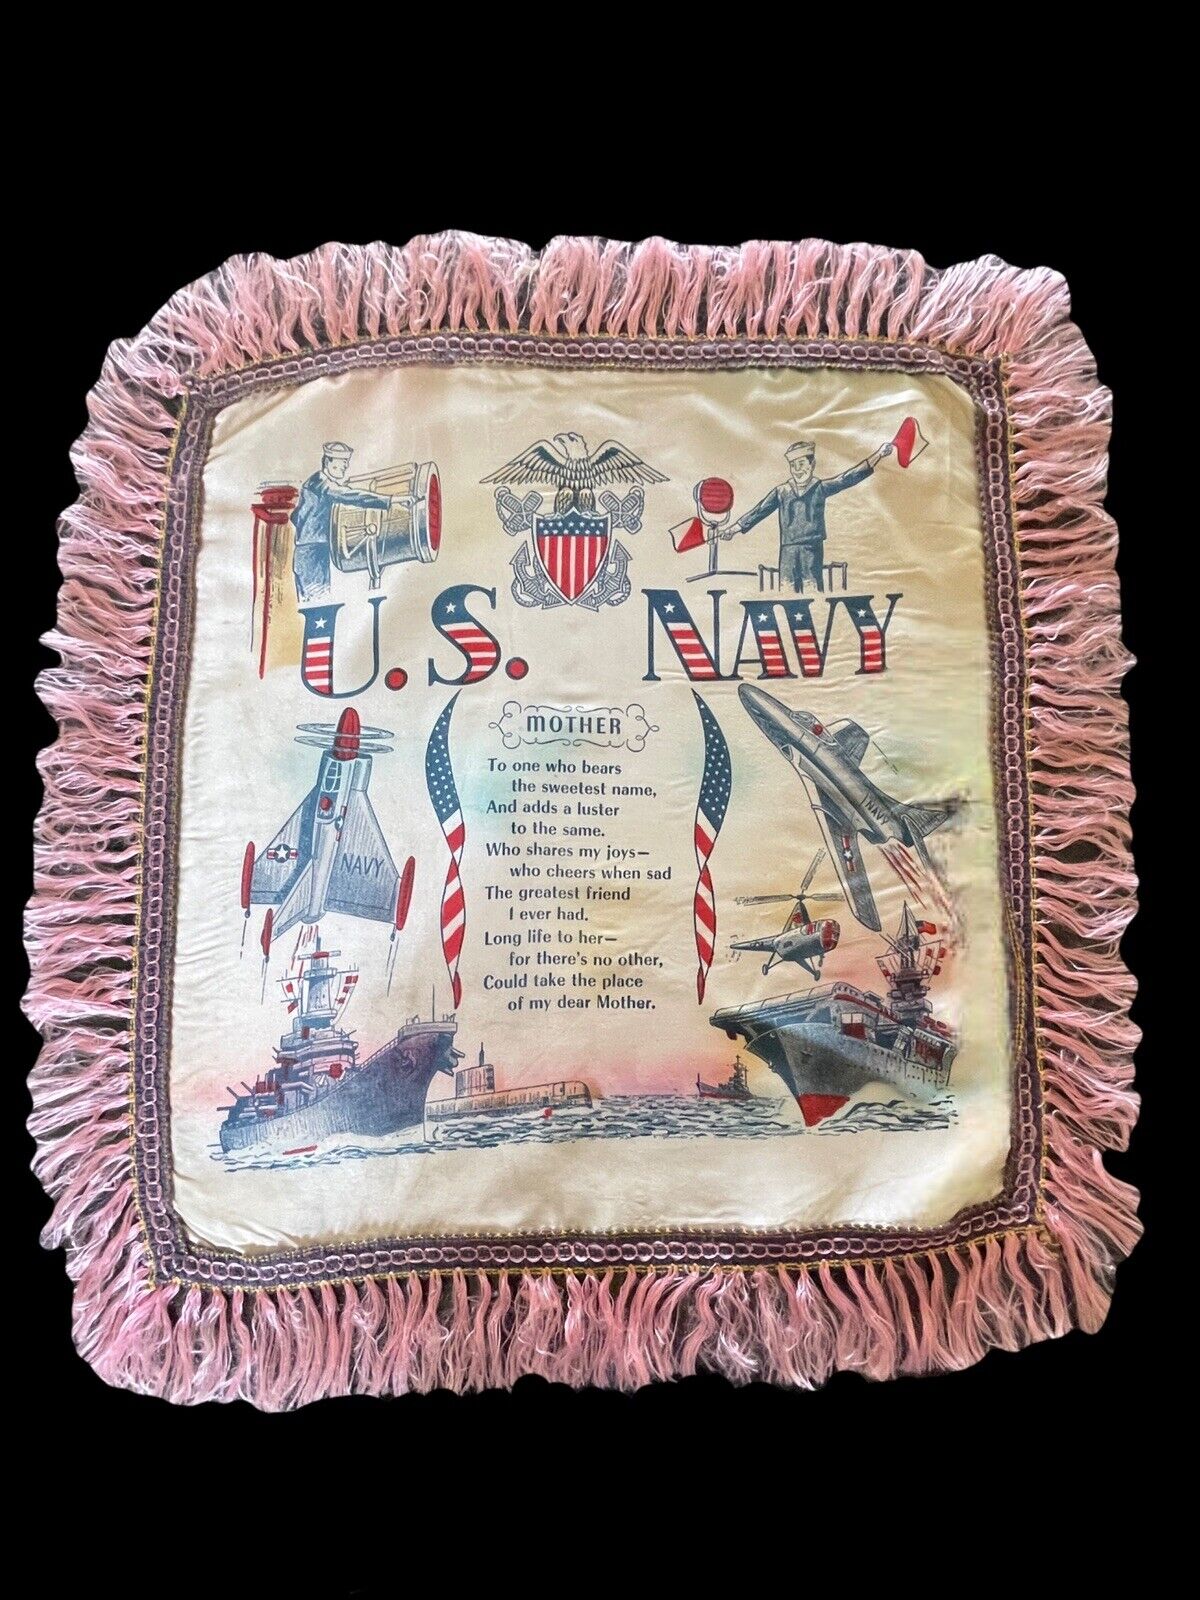 VINTAGE WW2 U.S. Navy MILITARY SWEETHEART, MOTHER PILLOWCASE A